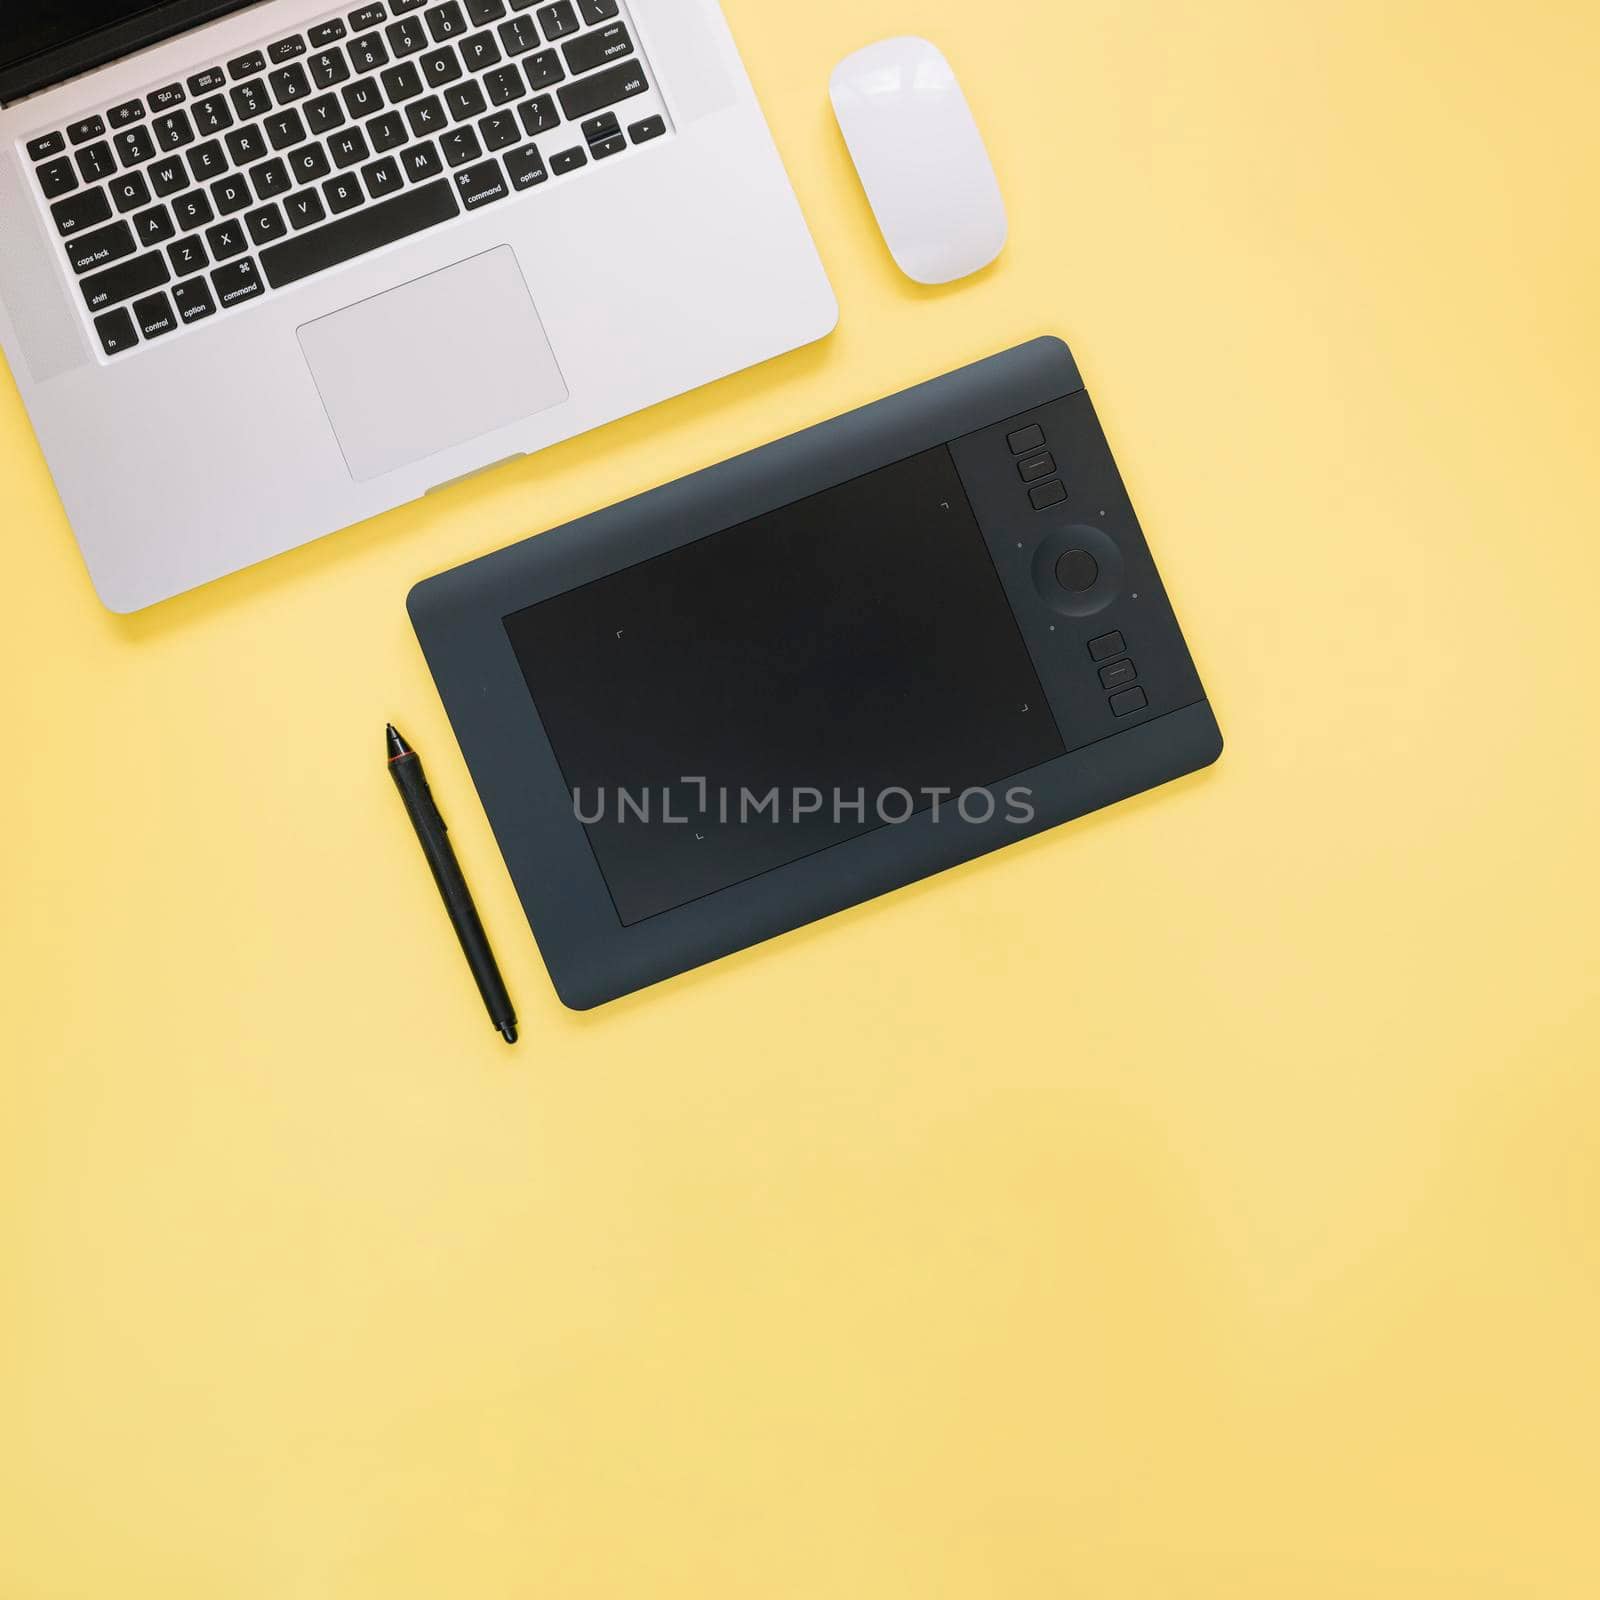 elevated view graphic digital tablet laptop yellow background. High quality photo by Zahard